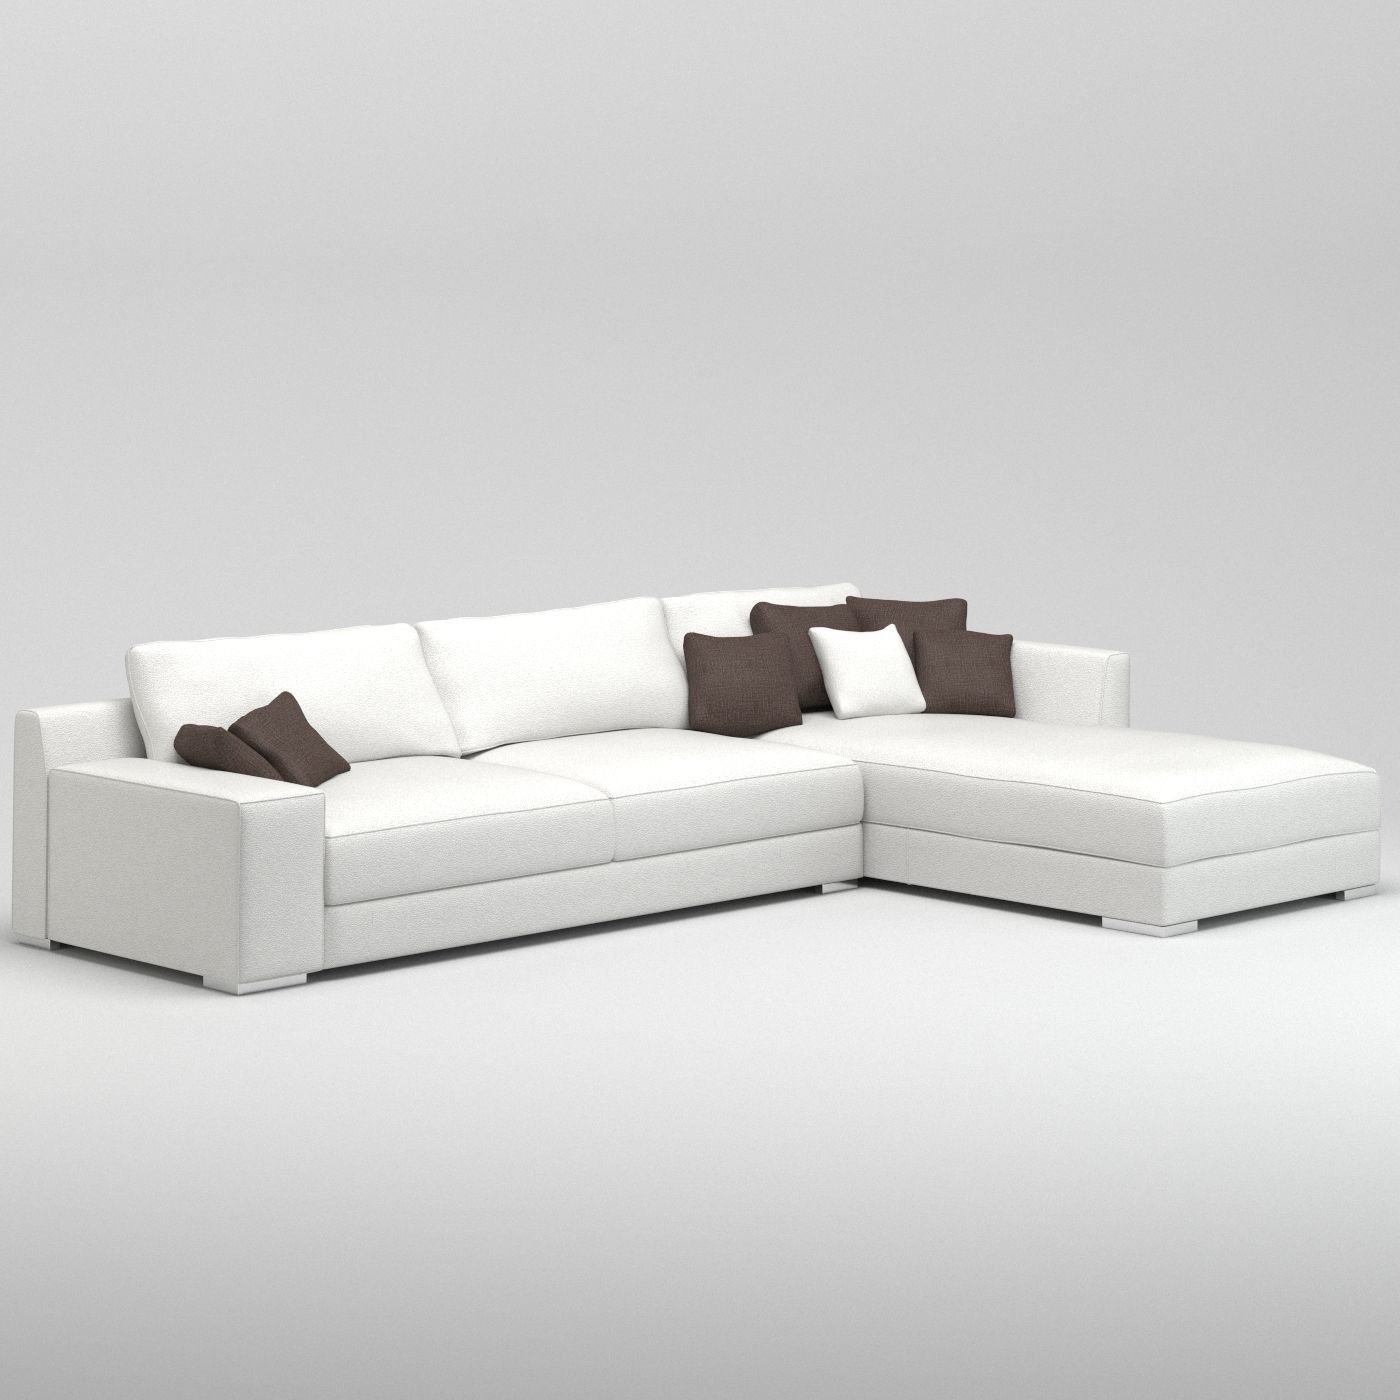 Furniture : Couchtuner Queen Sugar Sectional Sofa Greenville Sc In Greenville Sc Sectional Sofas (View 6 of 10)